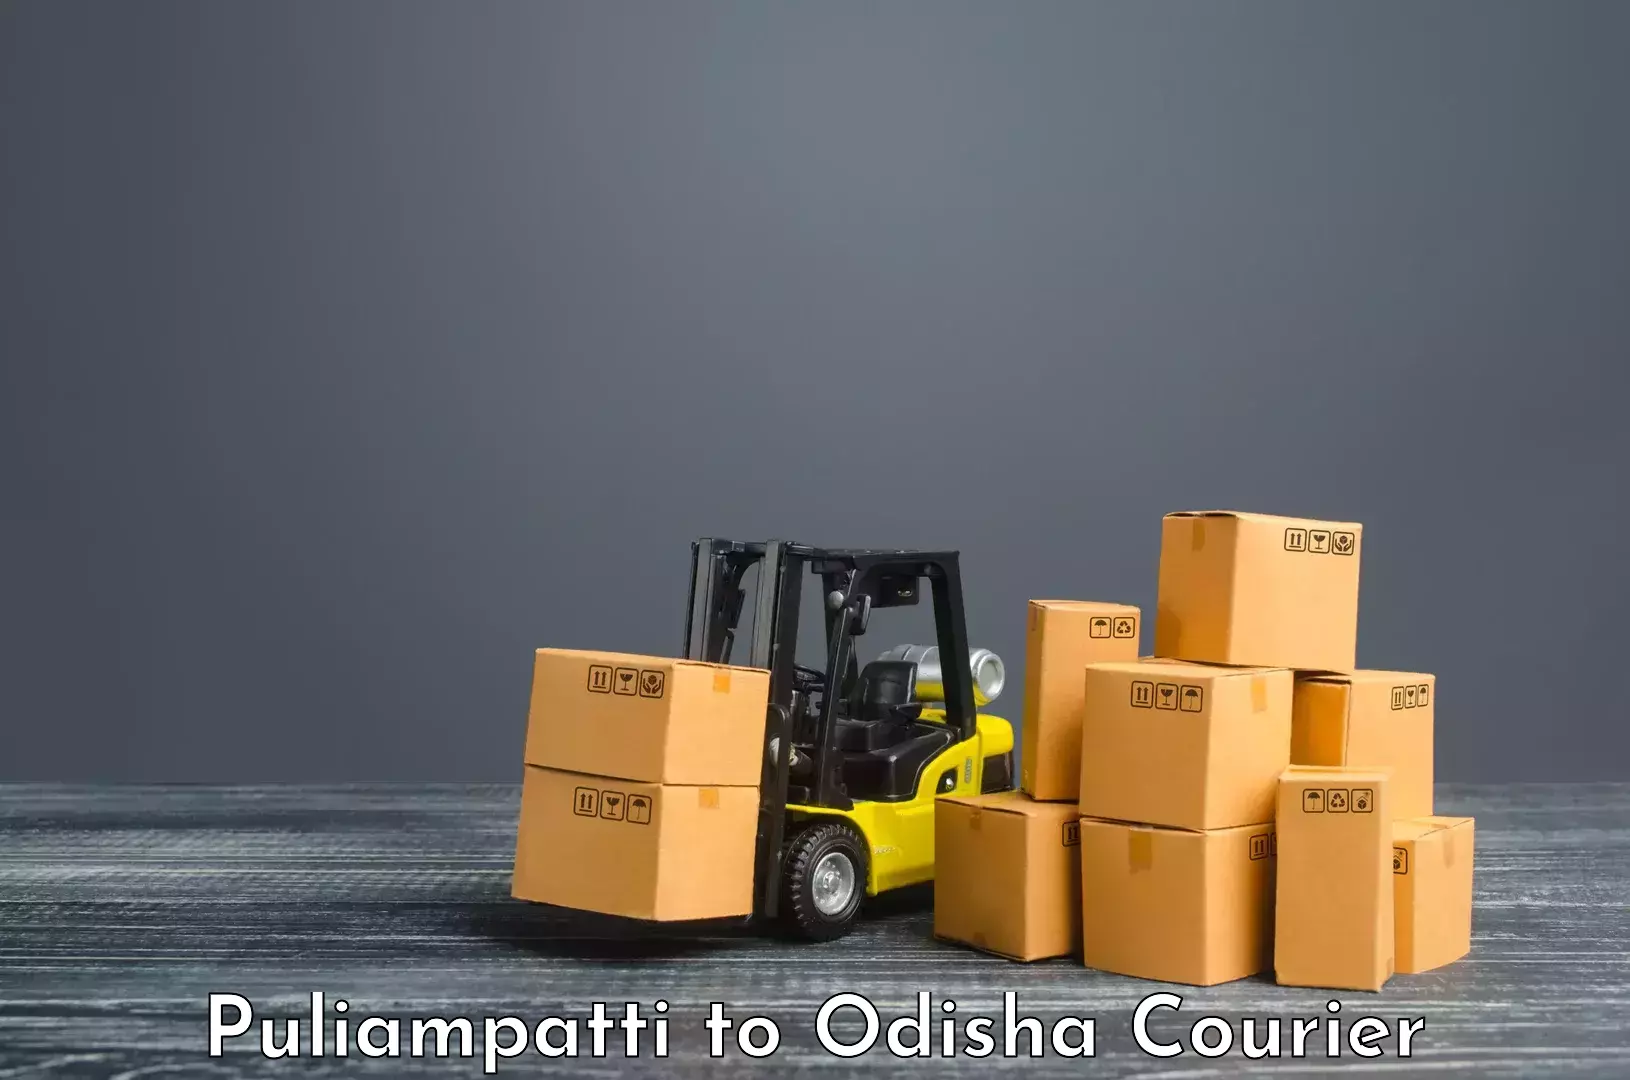 Reliable package handling Puliampatti to Bhuban